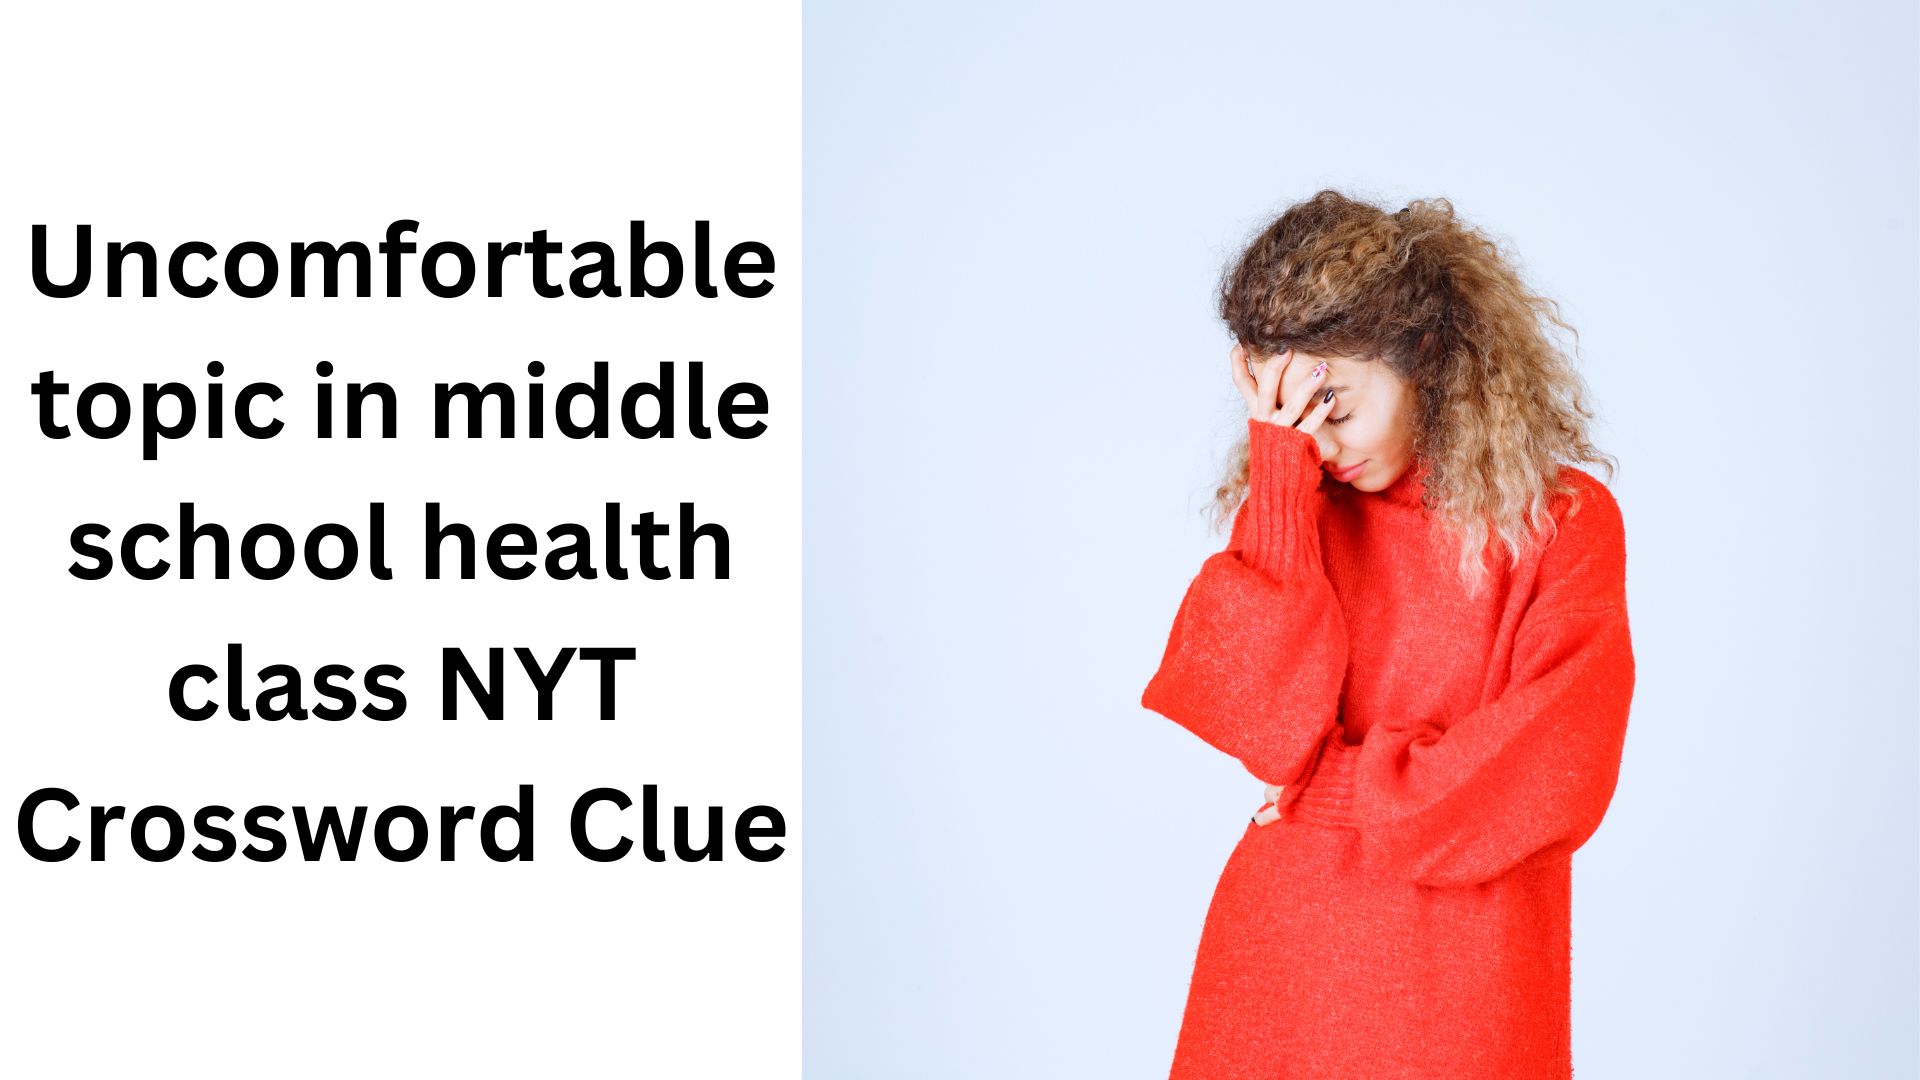 Uncomfortable topic in middle school health class NYT Crossword Clue